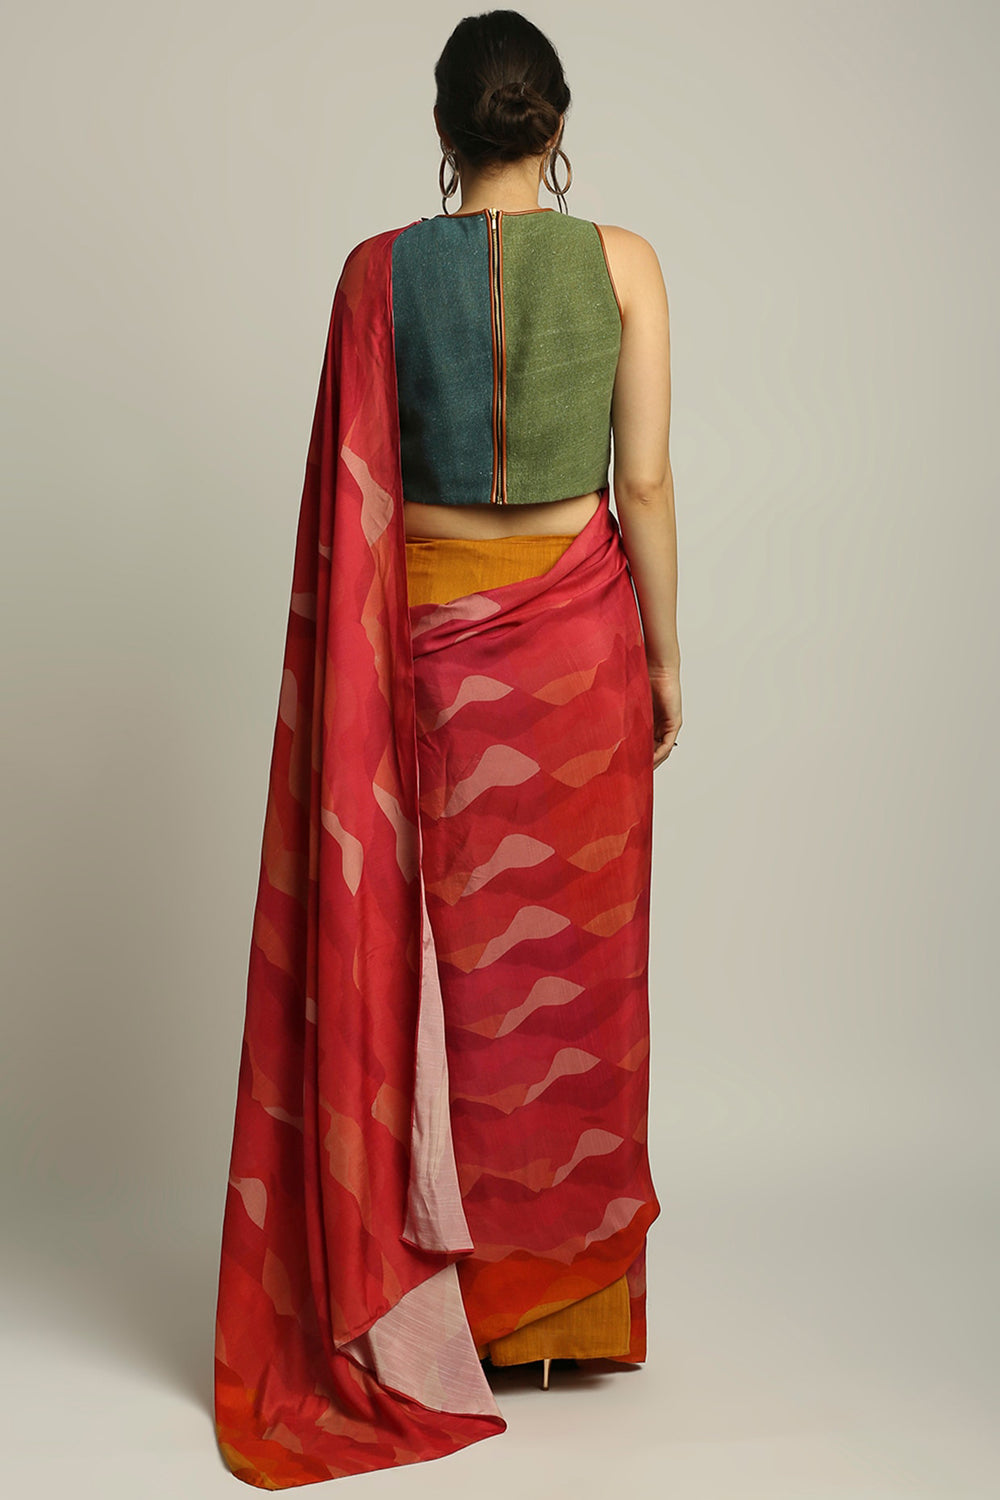 Dune Shadow Printed Pre-Stitched Saree With Blouse